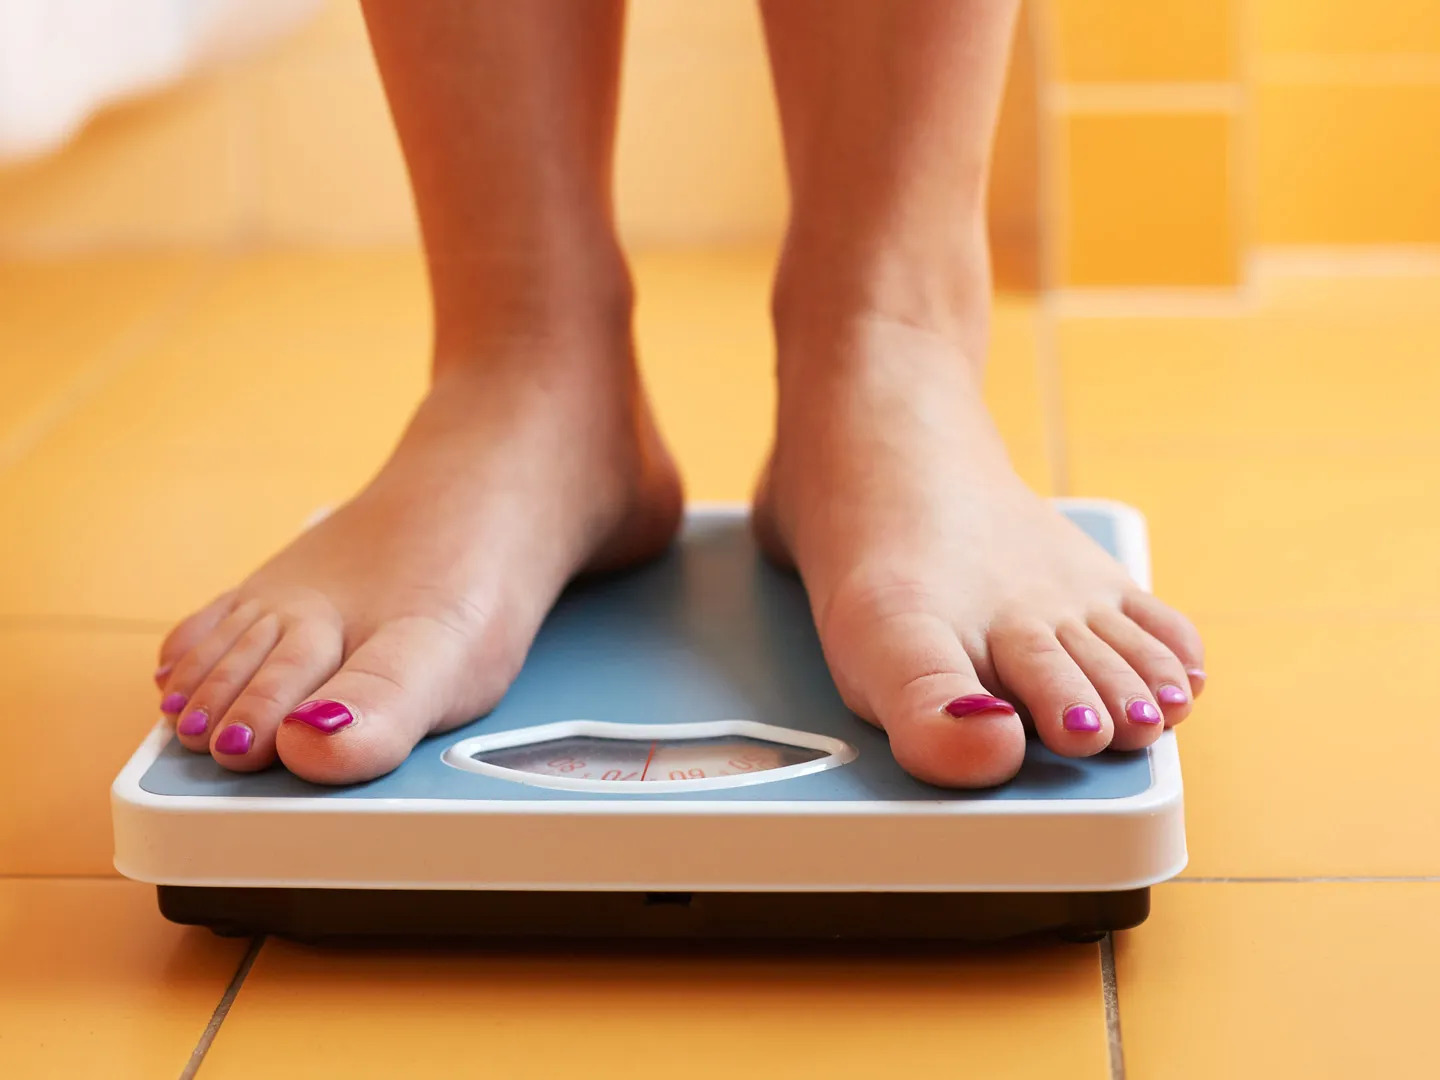 How To Measure Weight On A Scale